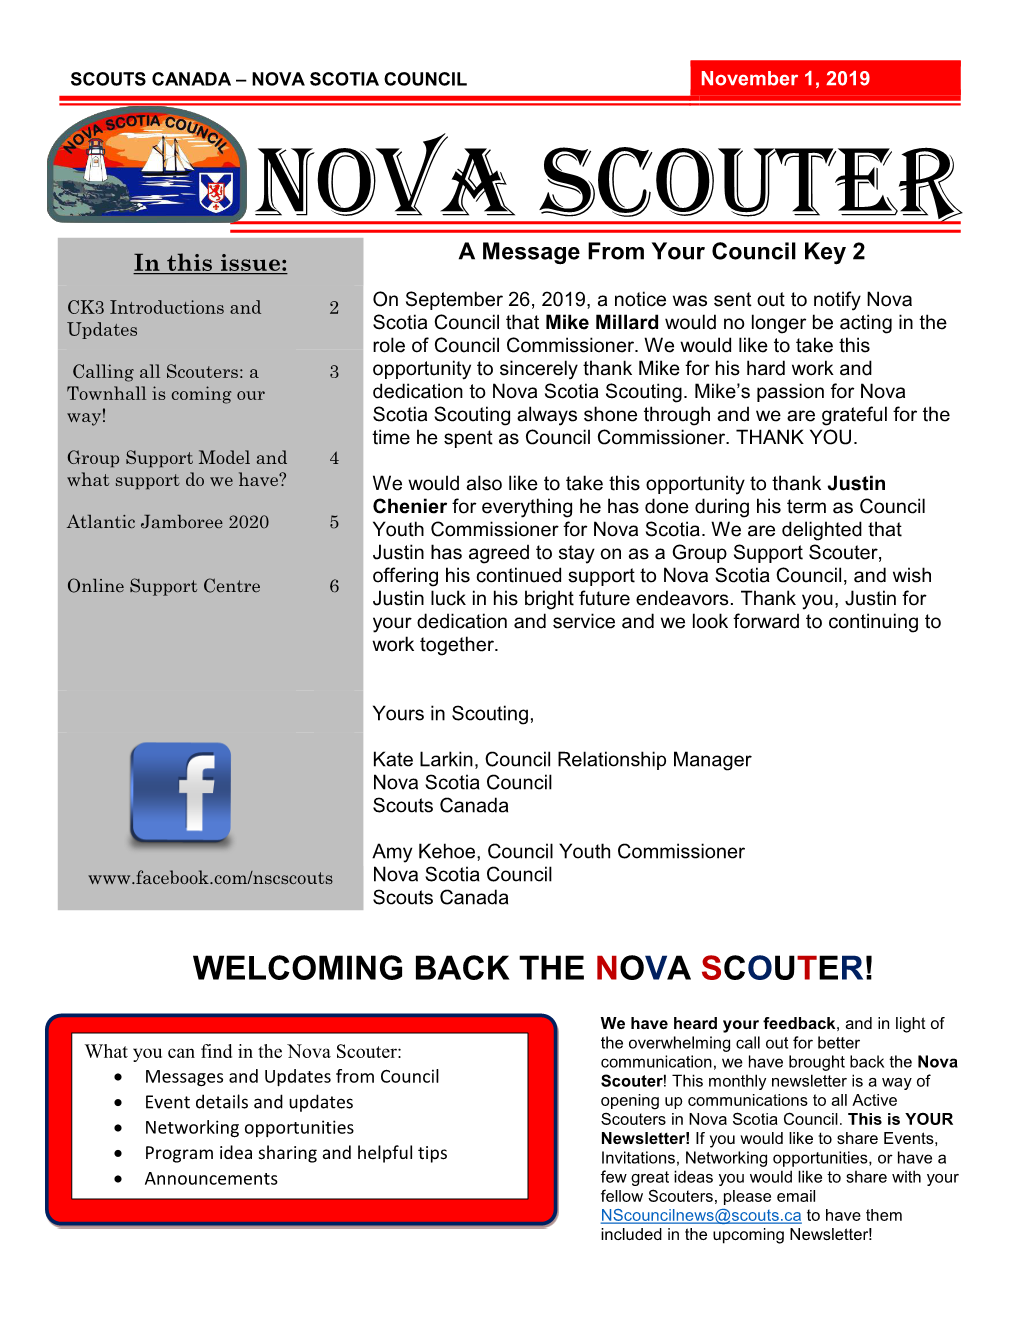 NOVA SCOTIA COUNCIL November 1, 2019 NOVA SCOUTER in This Issue: a Message from Your Council Key 2